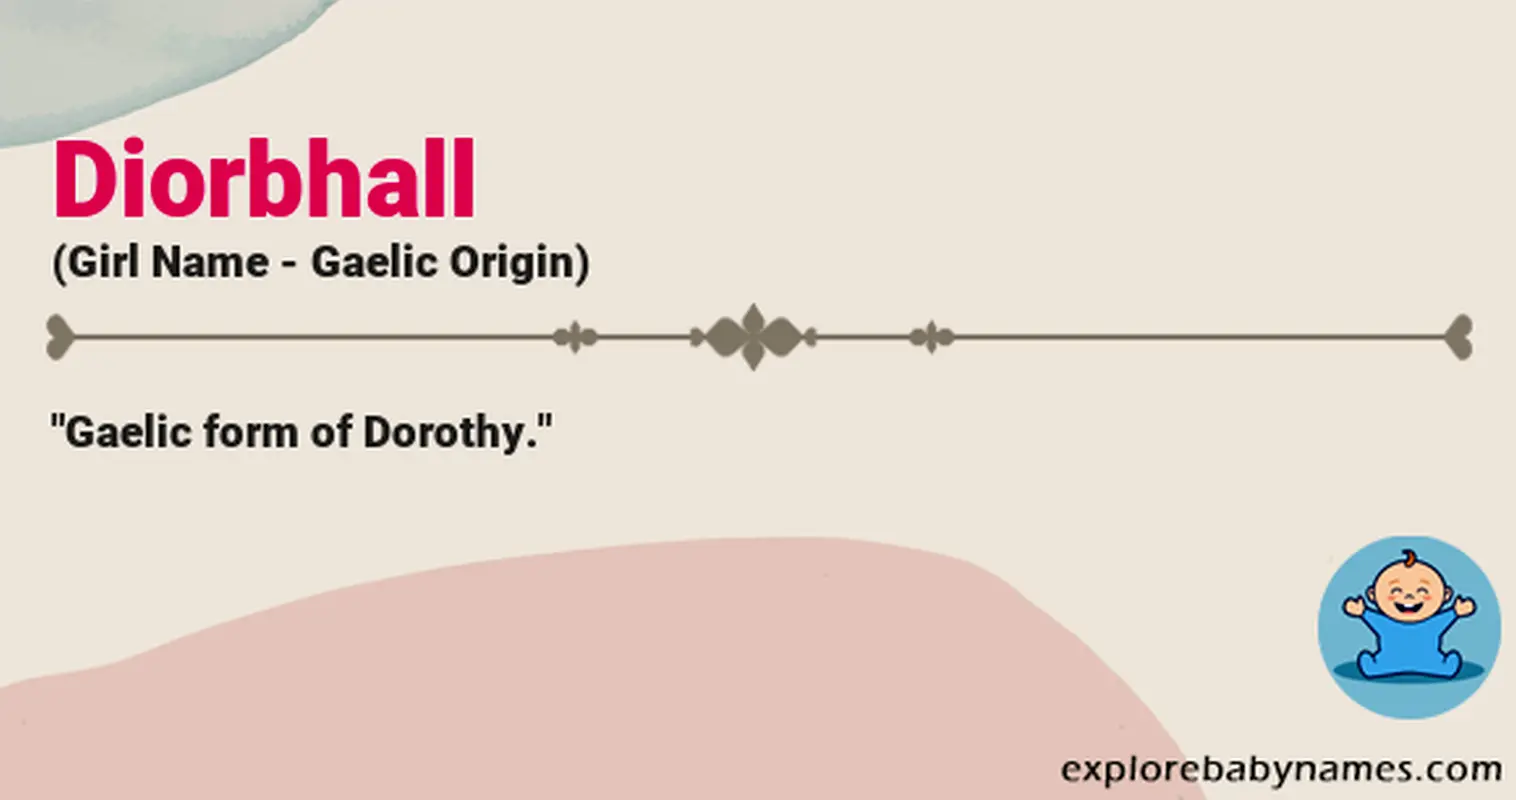 Meaning of Diorbhall